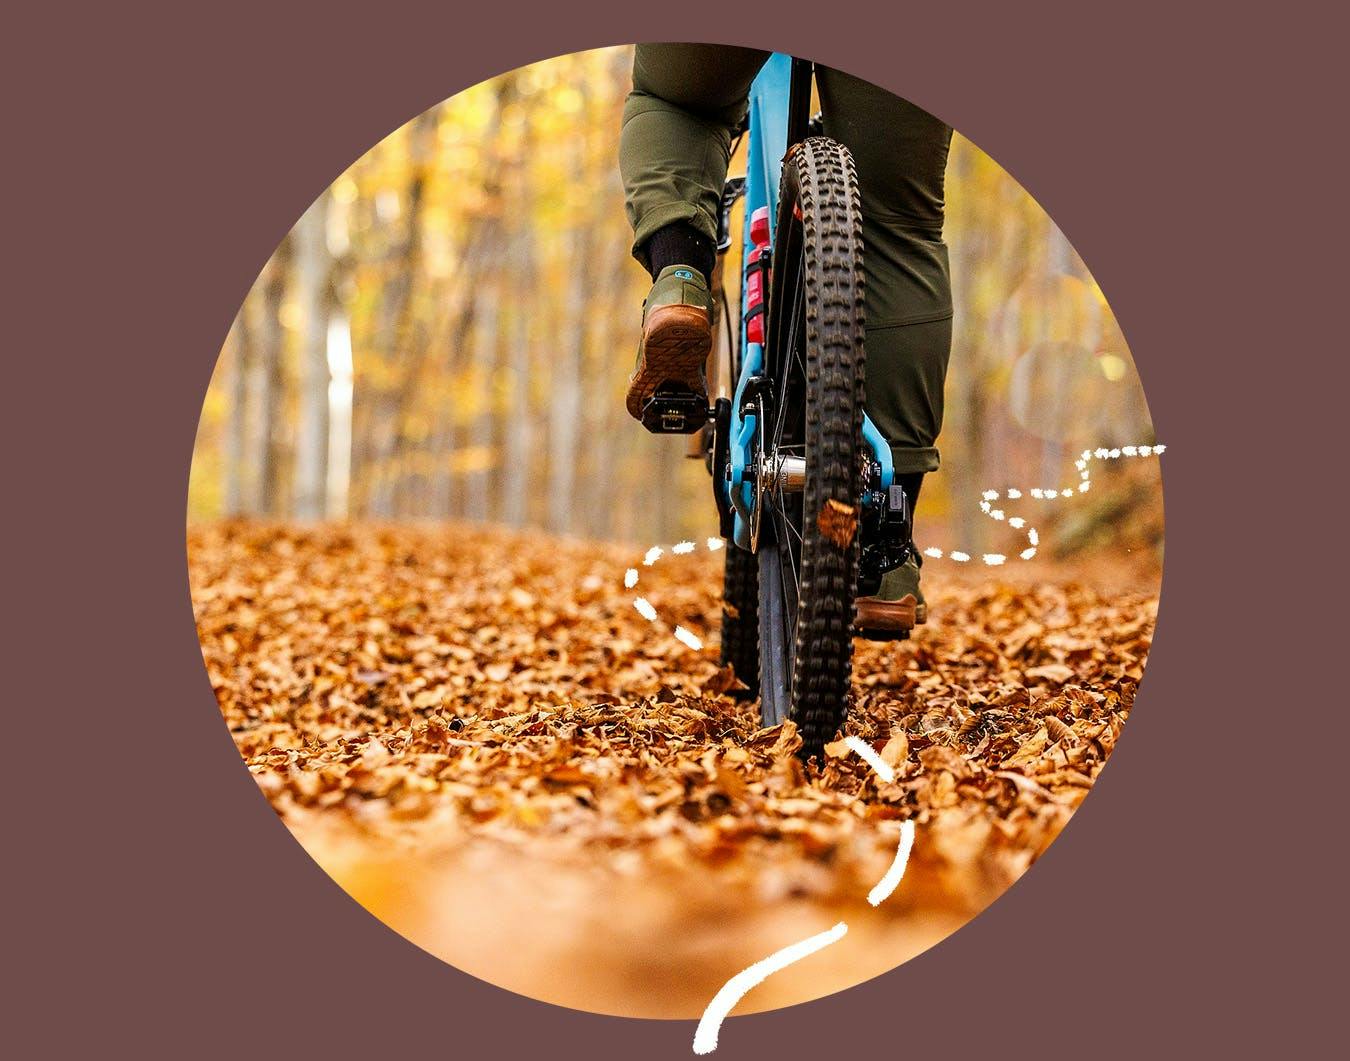 A mountain biker riding the Juliana Bicycles Joplin over a leaf covered trail